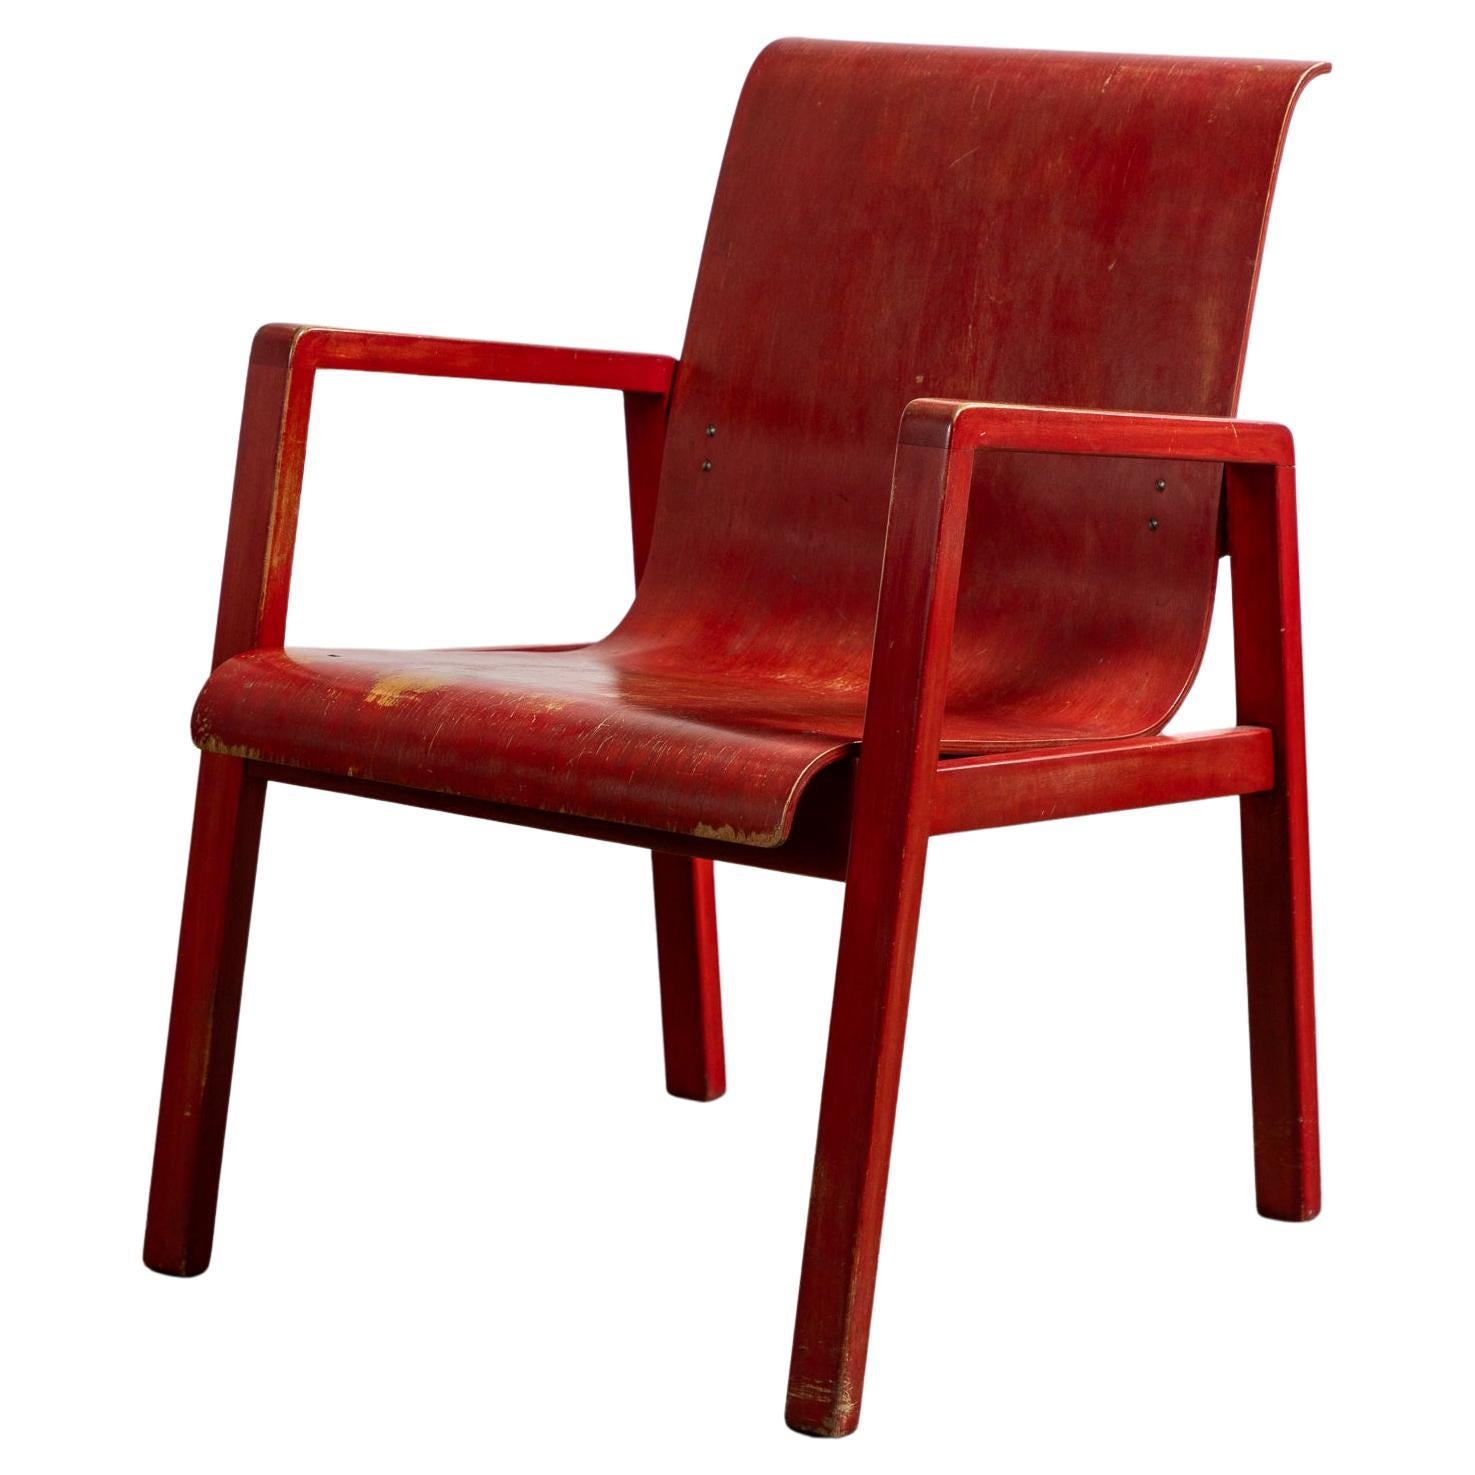 Early Alvar Aalto Hallway Armchair in Red Lacquer Finish  For Sale